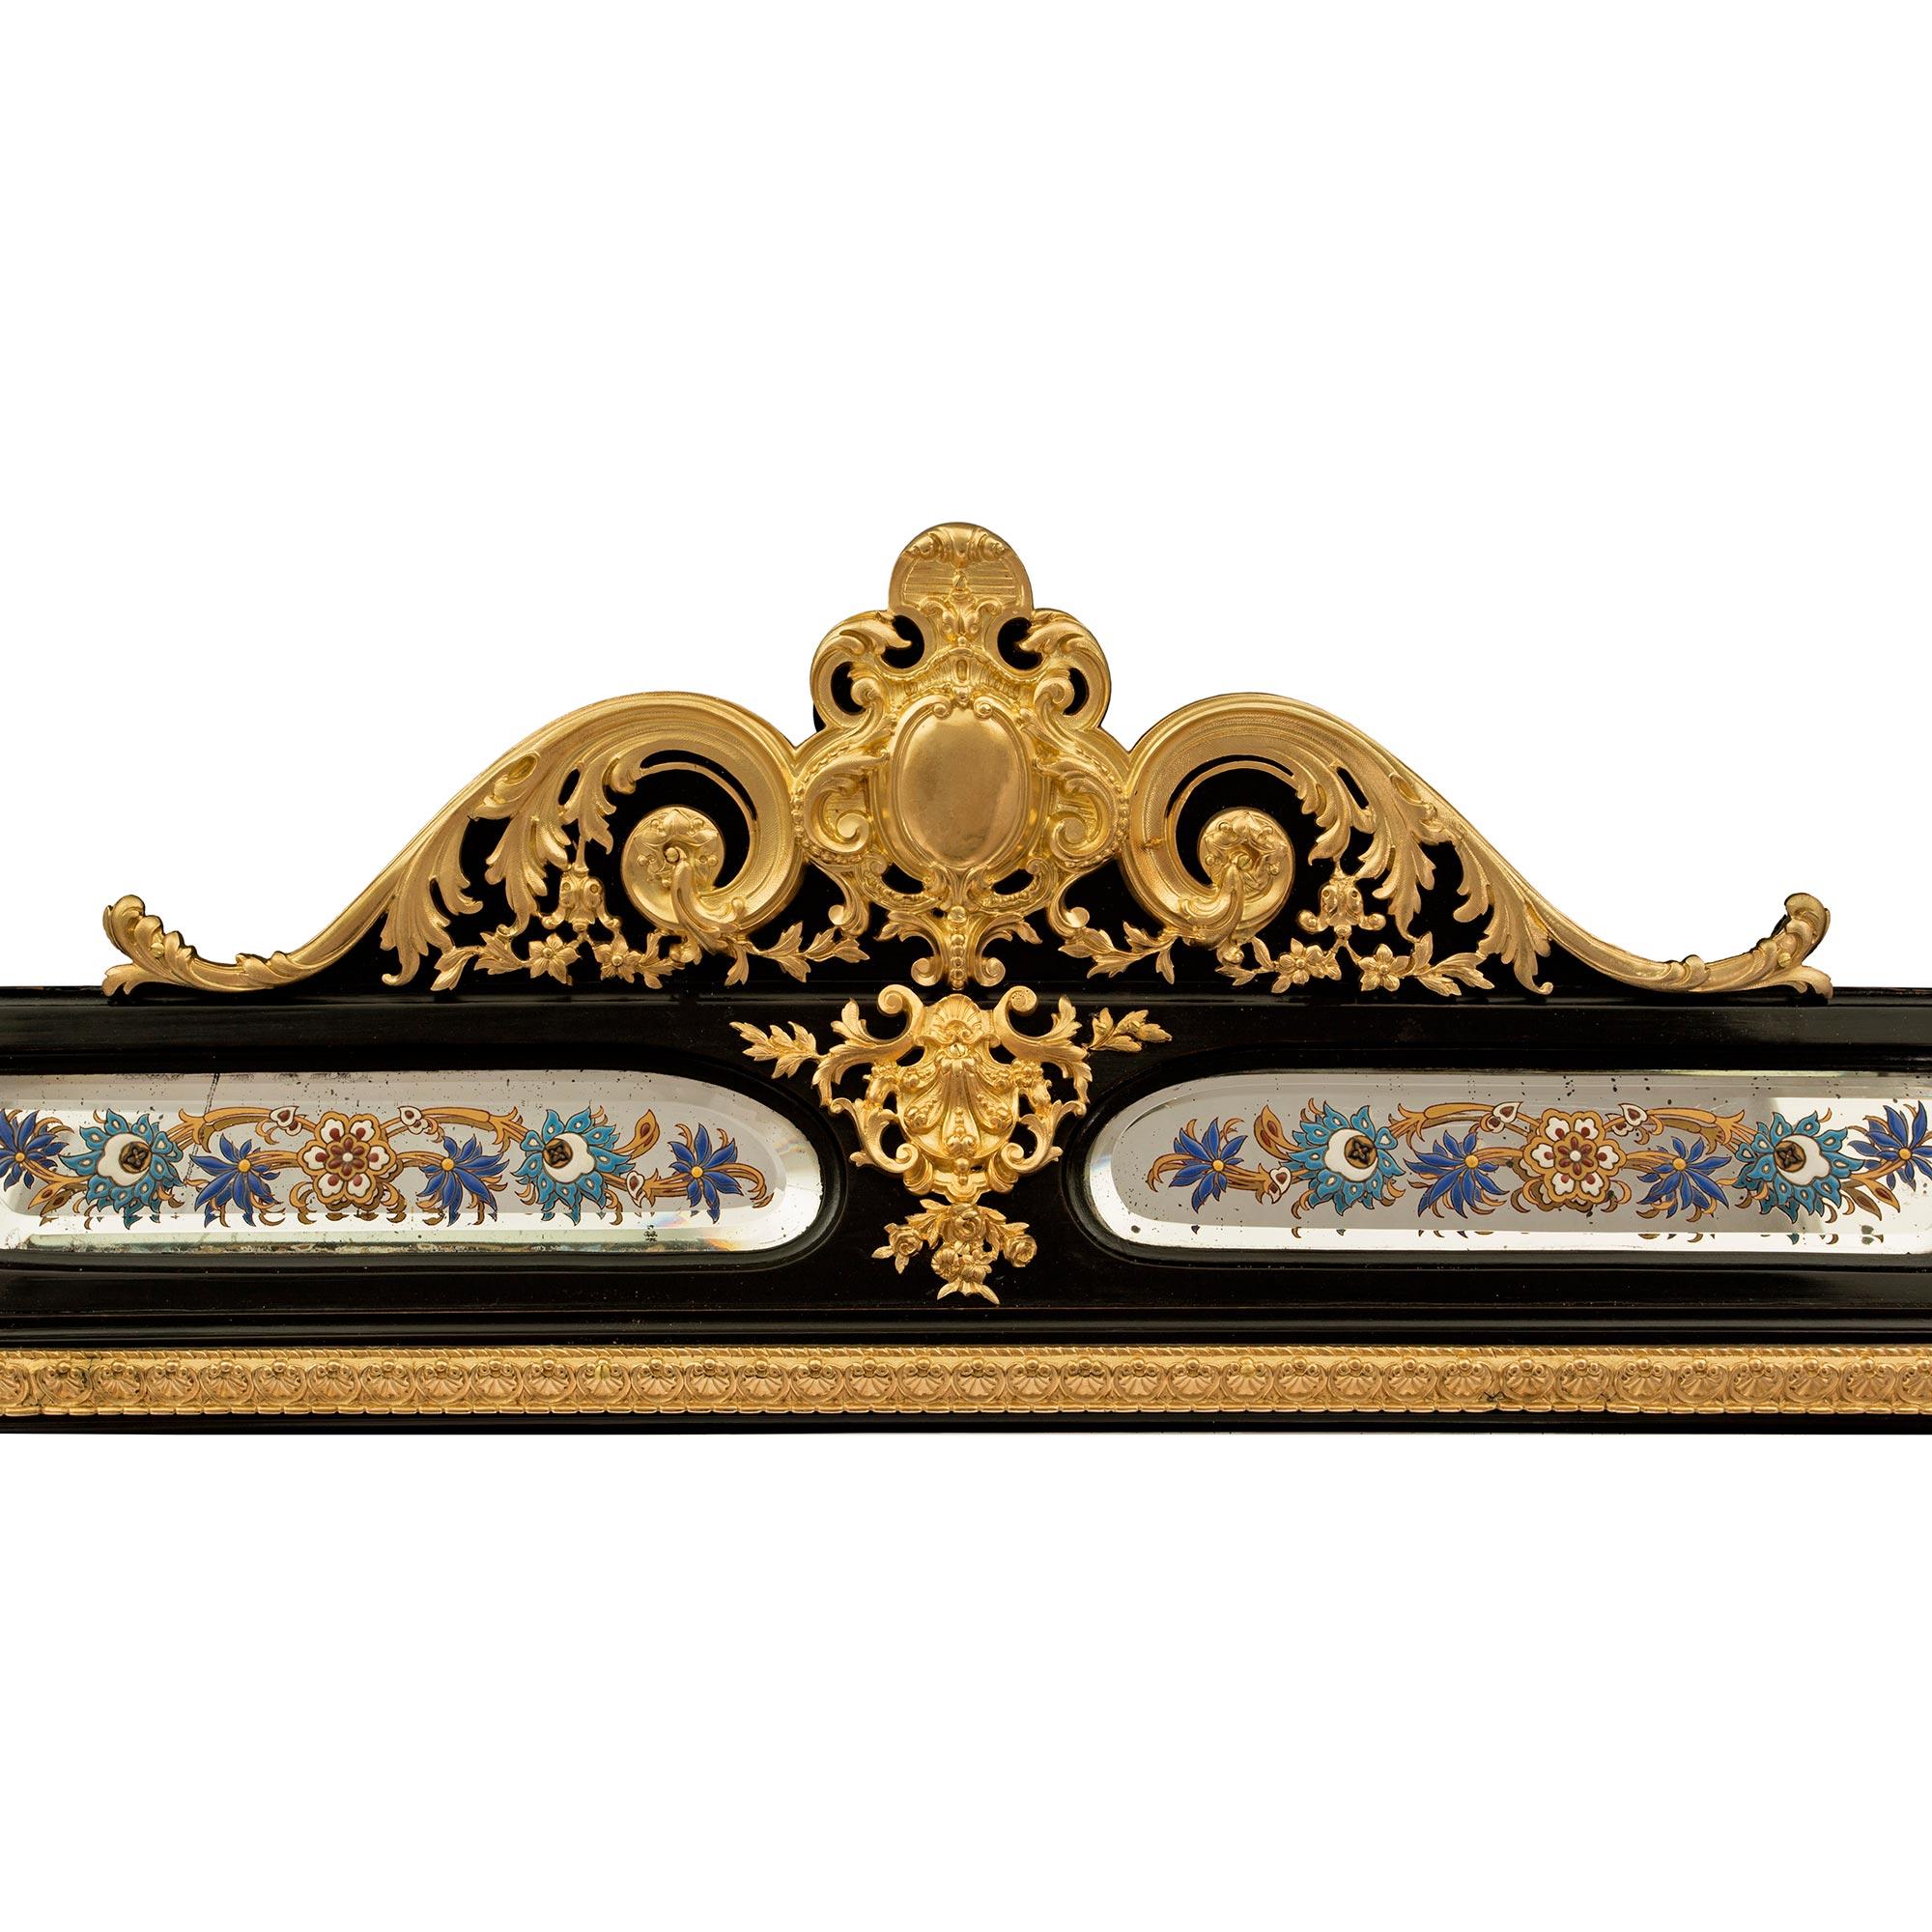 French Mid-19th Century Napoleon III Period Ebony and Ormolu Mirror In Good Condition For Sale In West Palm Beach, FL